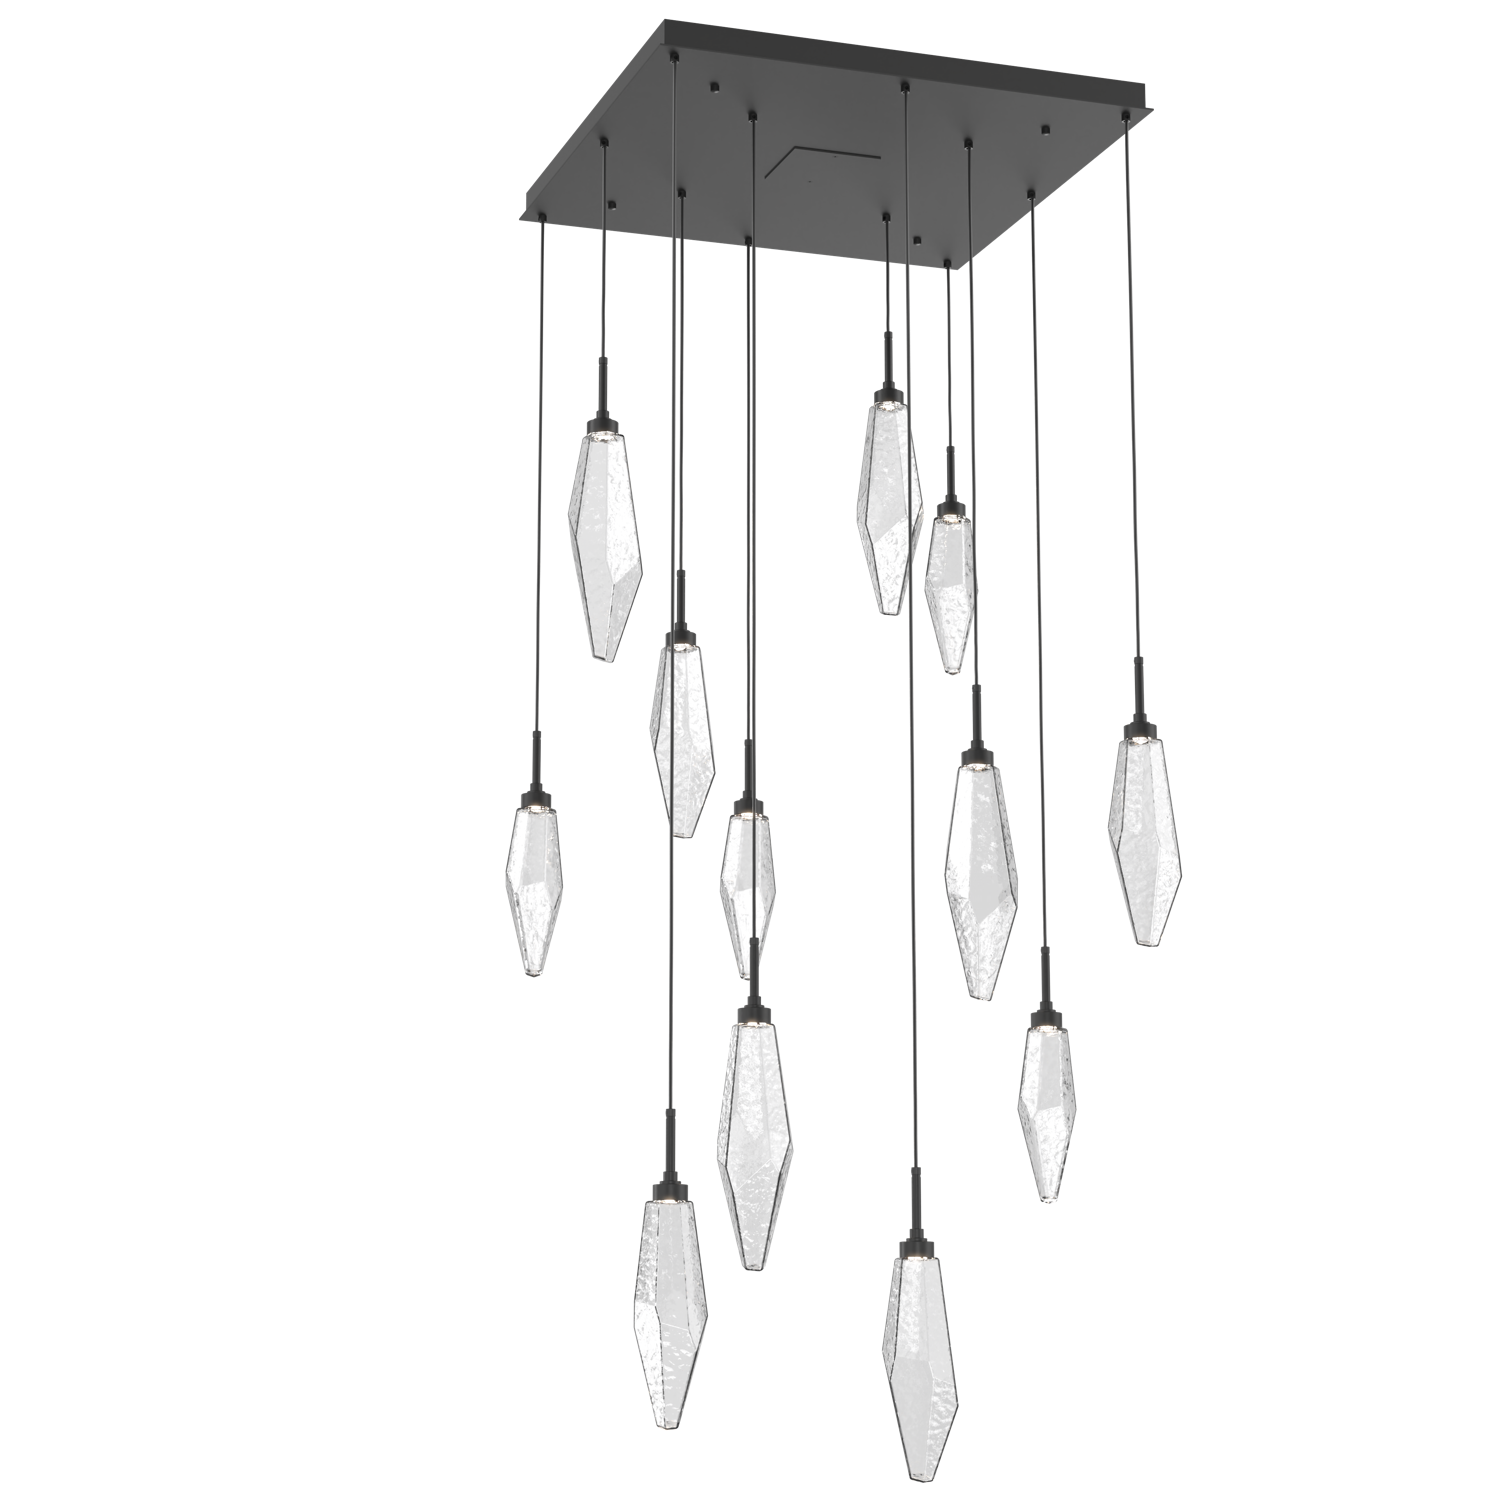 CHB0050-12-MB-CC-Hammerton-Studio-Rock-Crystal-12-light-square-pendant-chandelier-with-matte-black-finish-and-clear-glass-shades-and-LED-lamping